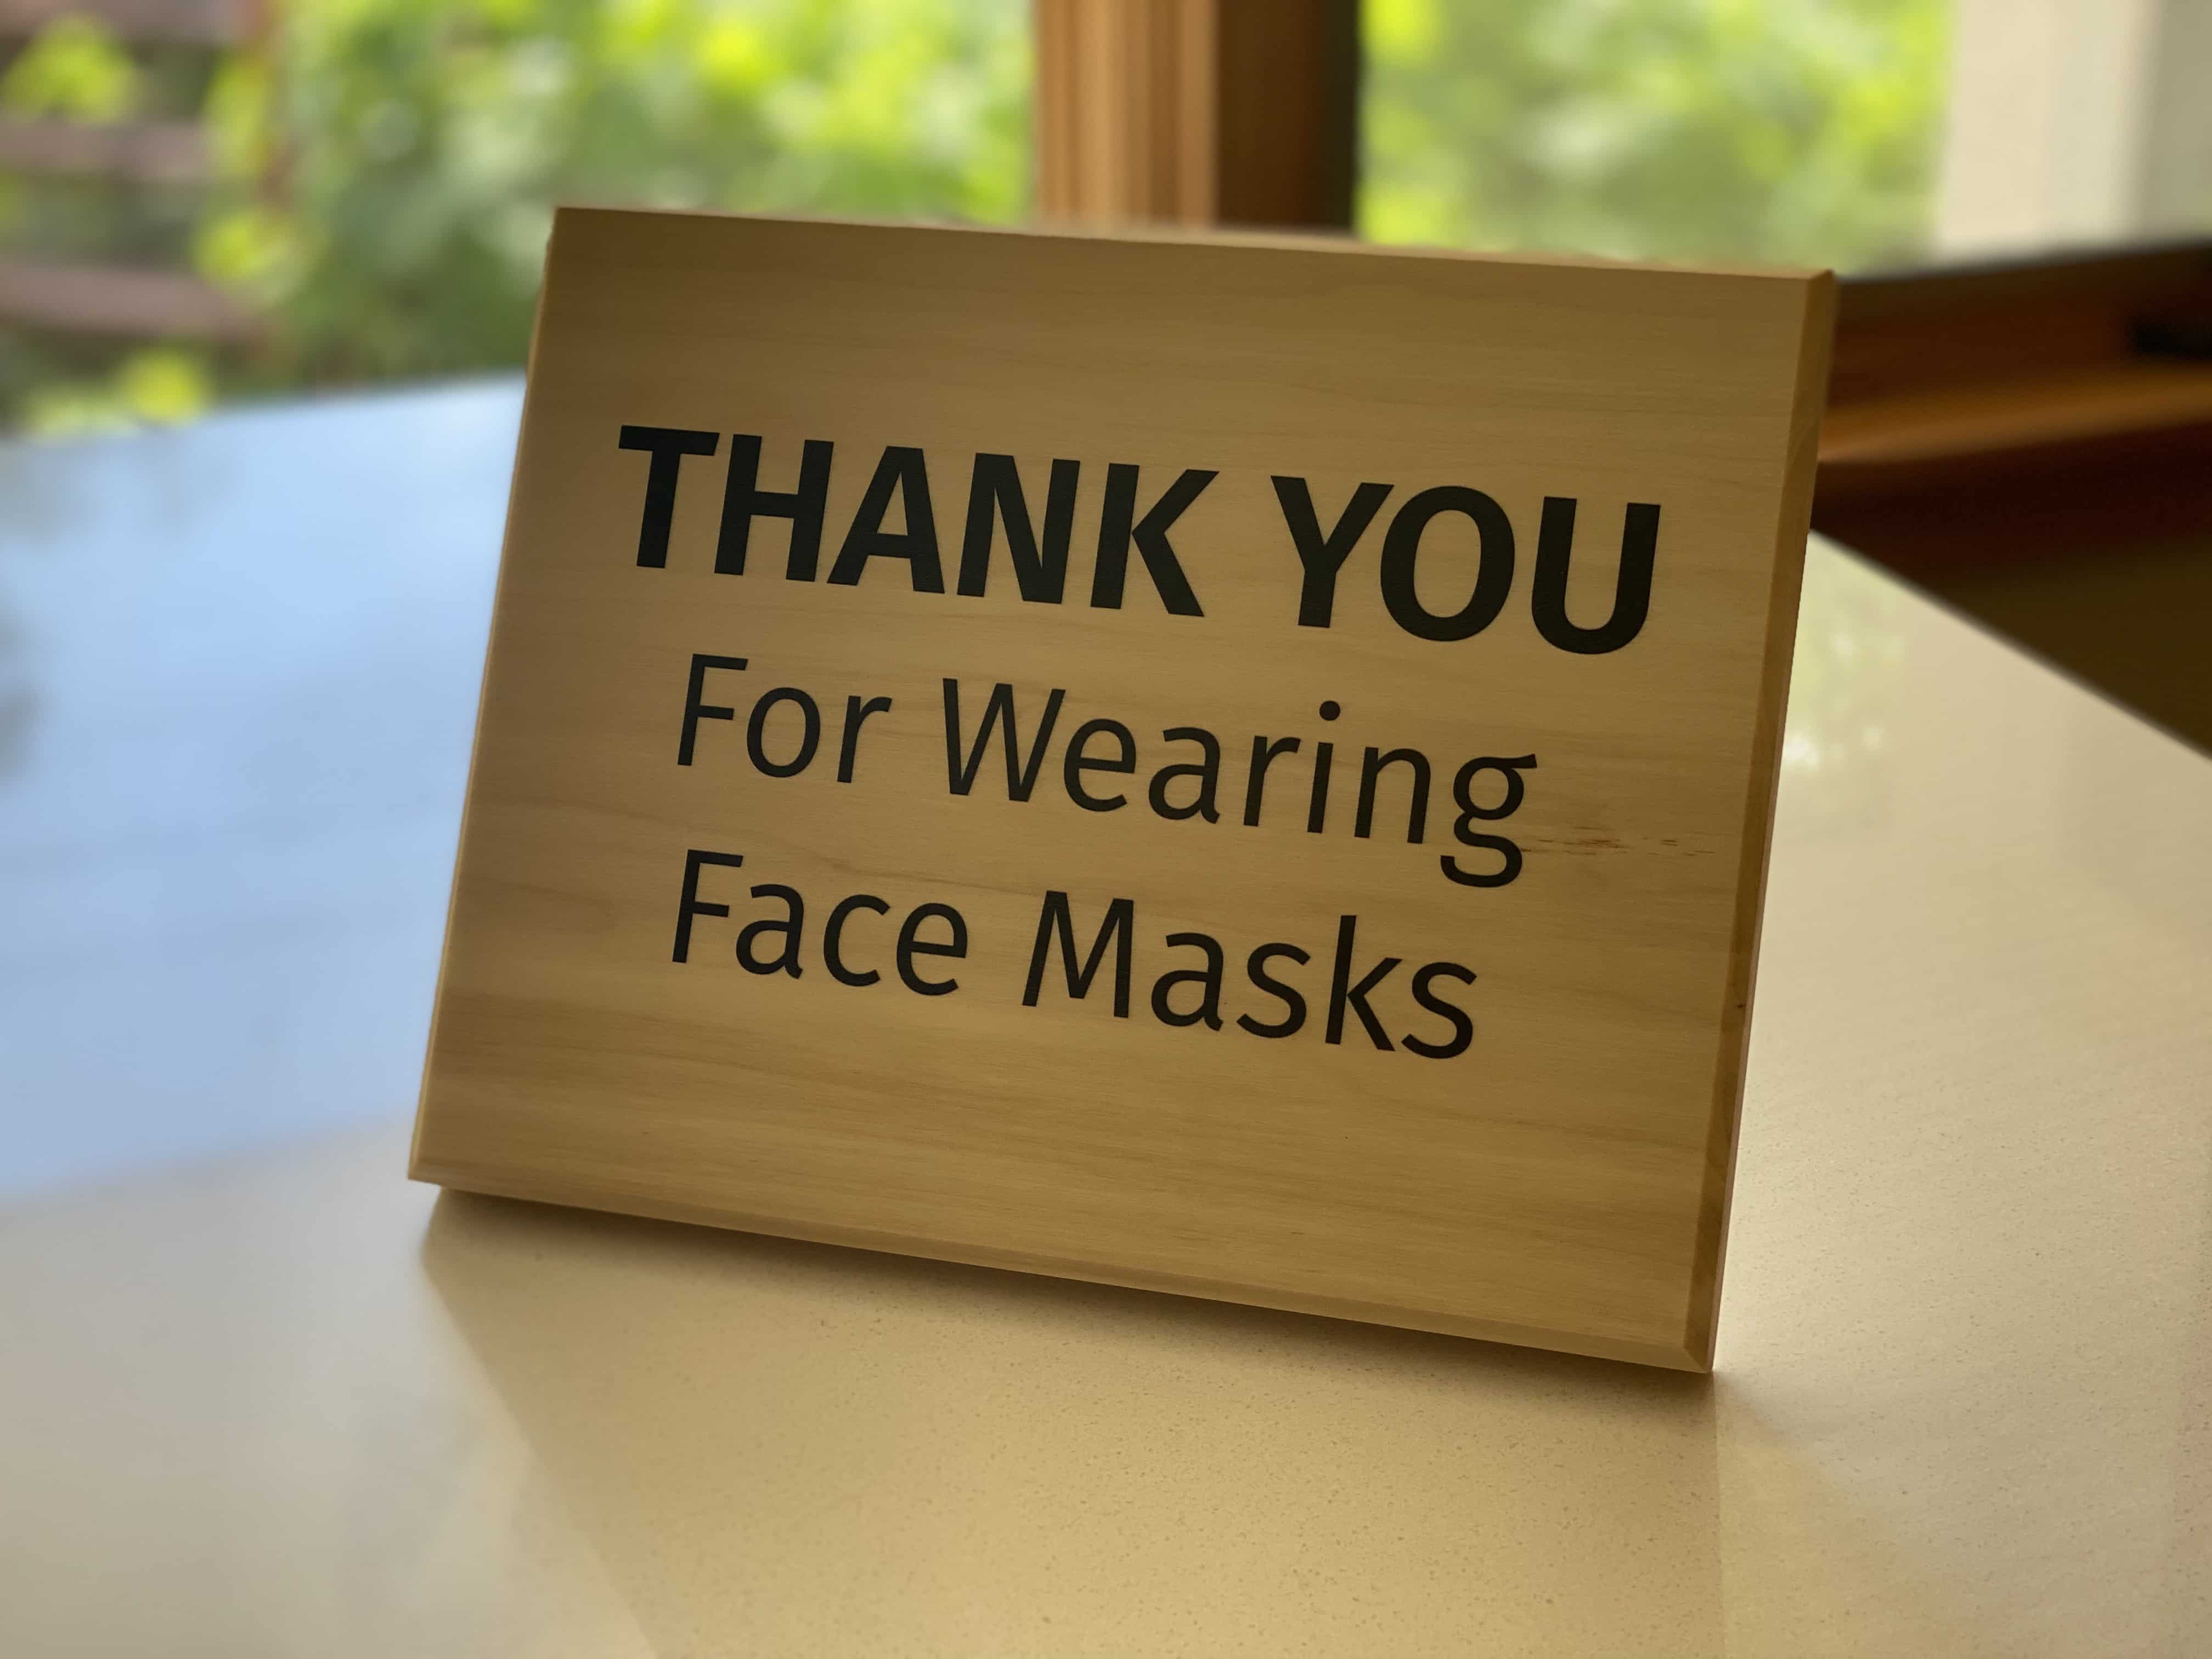 Thank you for wearing face masks sign, standing